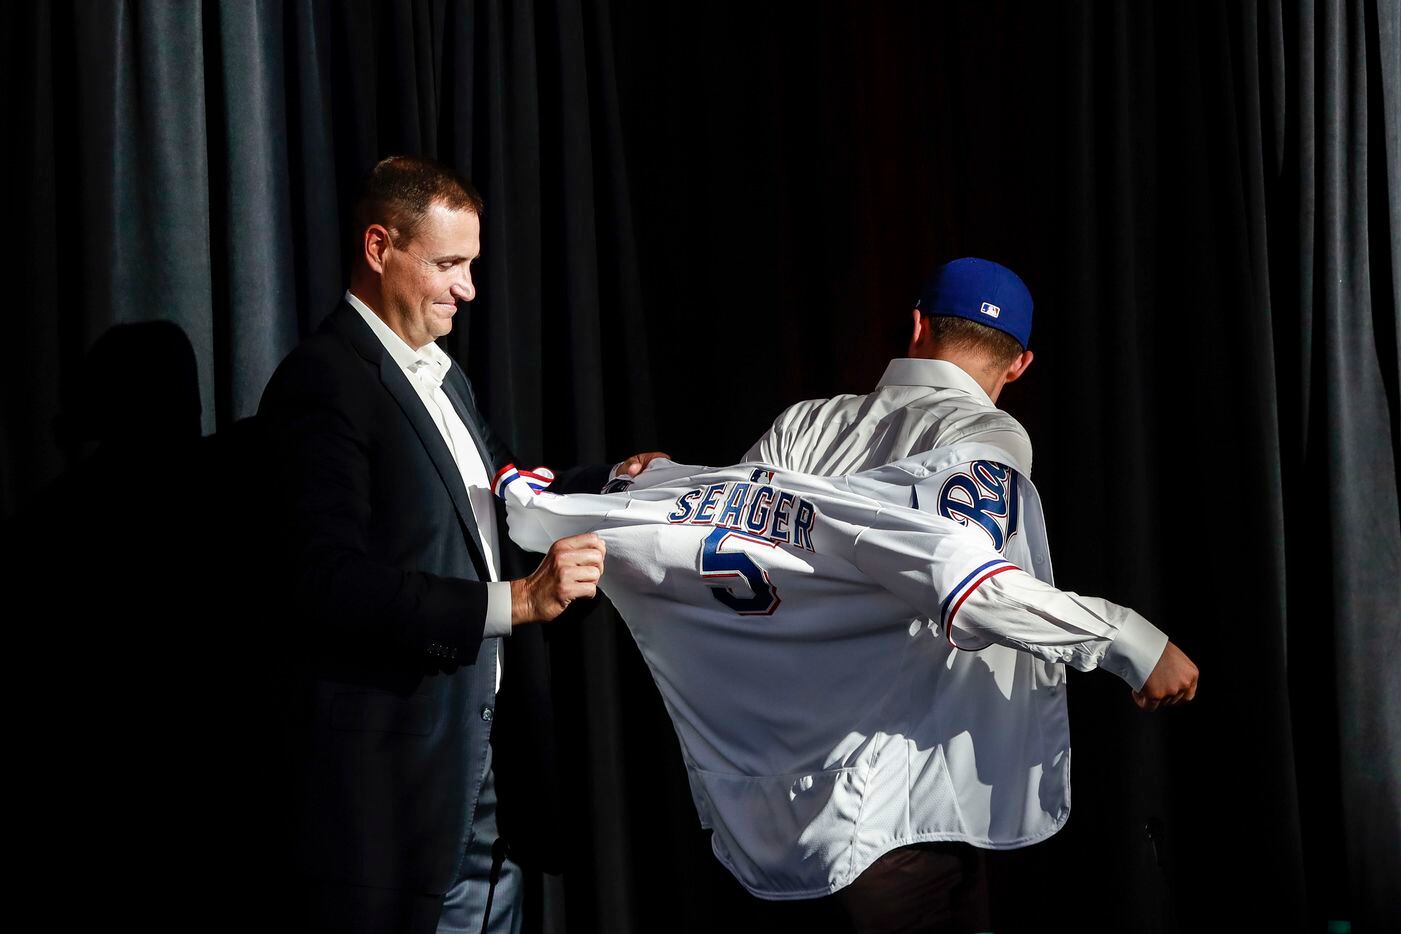 Corey Seager puts on his jersey at a news conference at Globe Life Park in Arlington on Wednesday, Dec. 1, 2021. Former Los Angeles Dodgers, Corey Seager, signed a ten year contract with the Texas Rangers for 325 million dollars. (Rebecca Slezak/The Dallas Morning News)